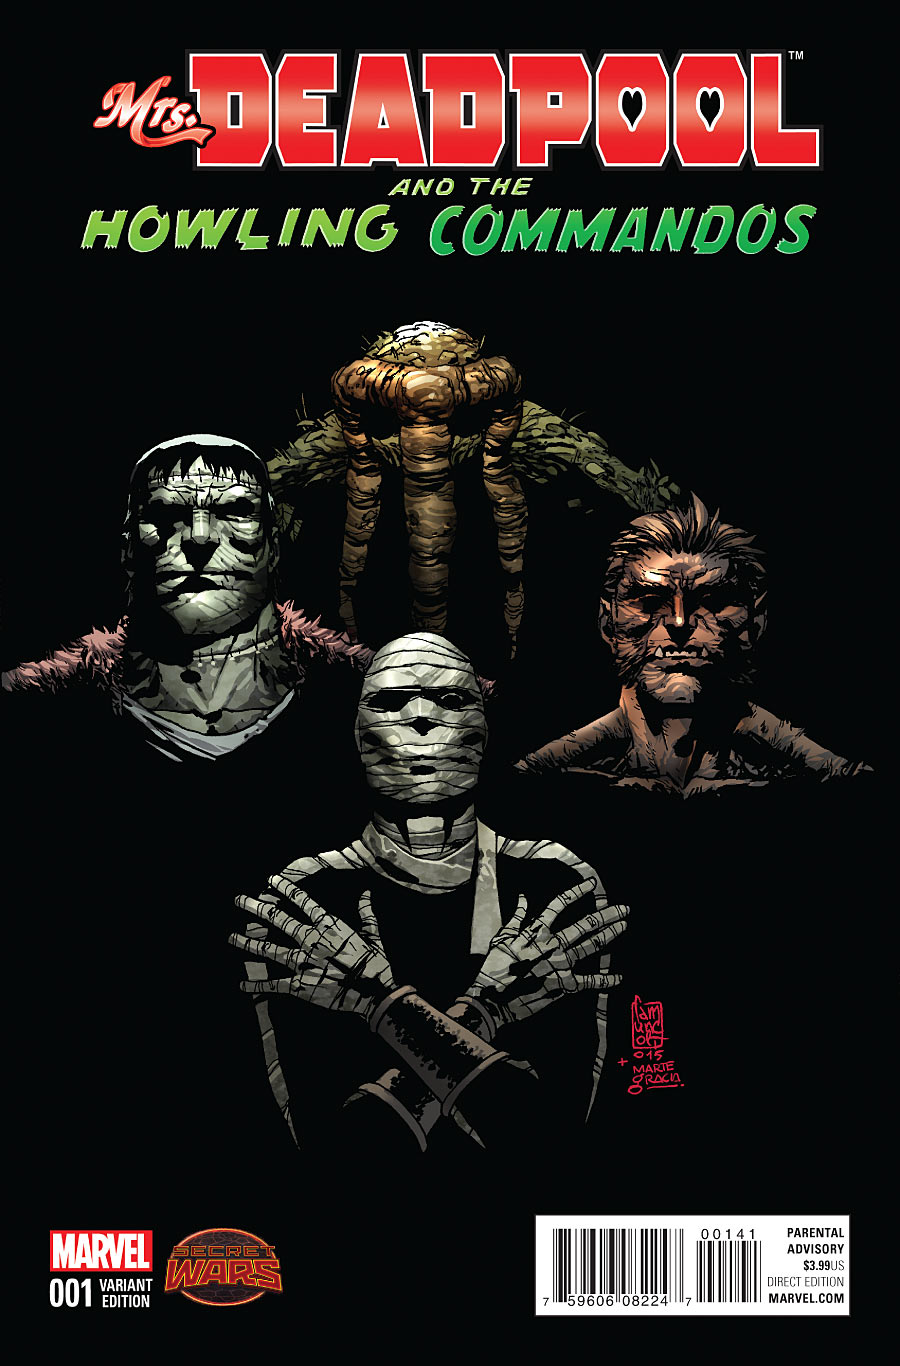 Mrs. Deadpool and the Howling Commandos #1